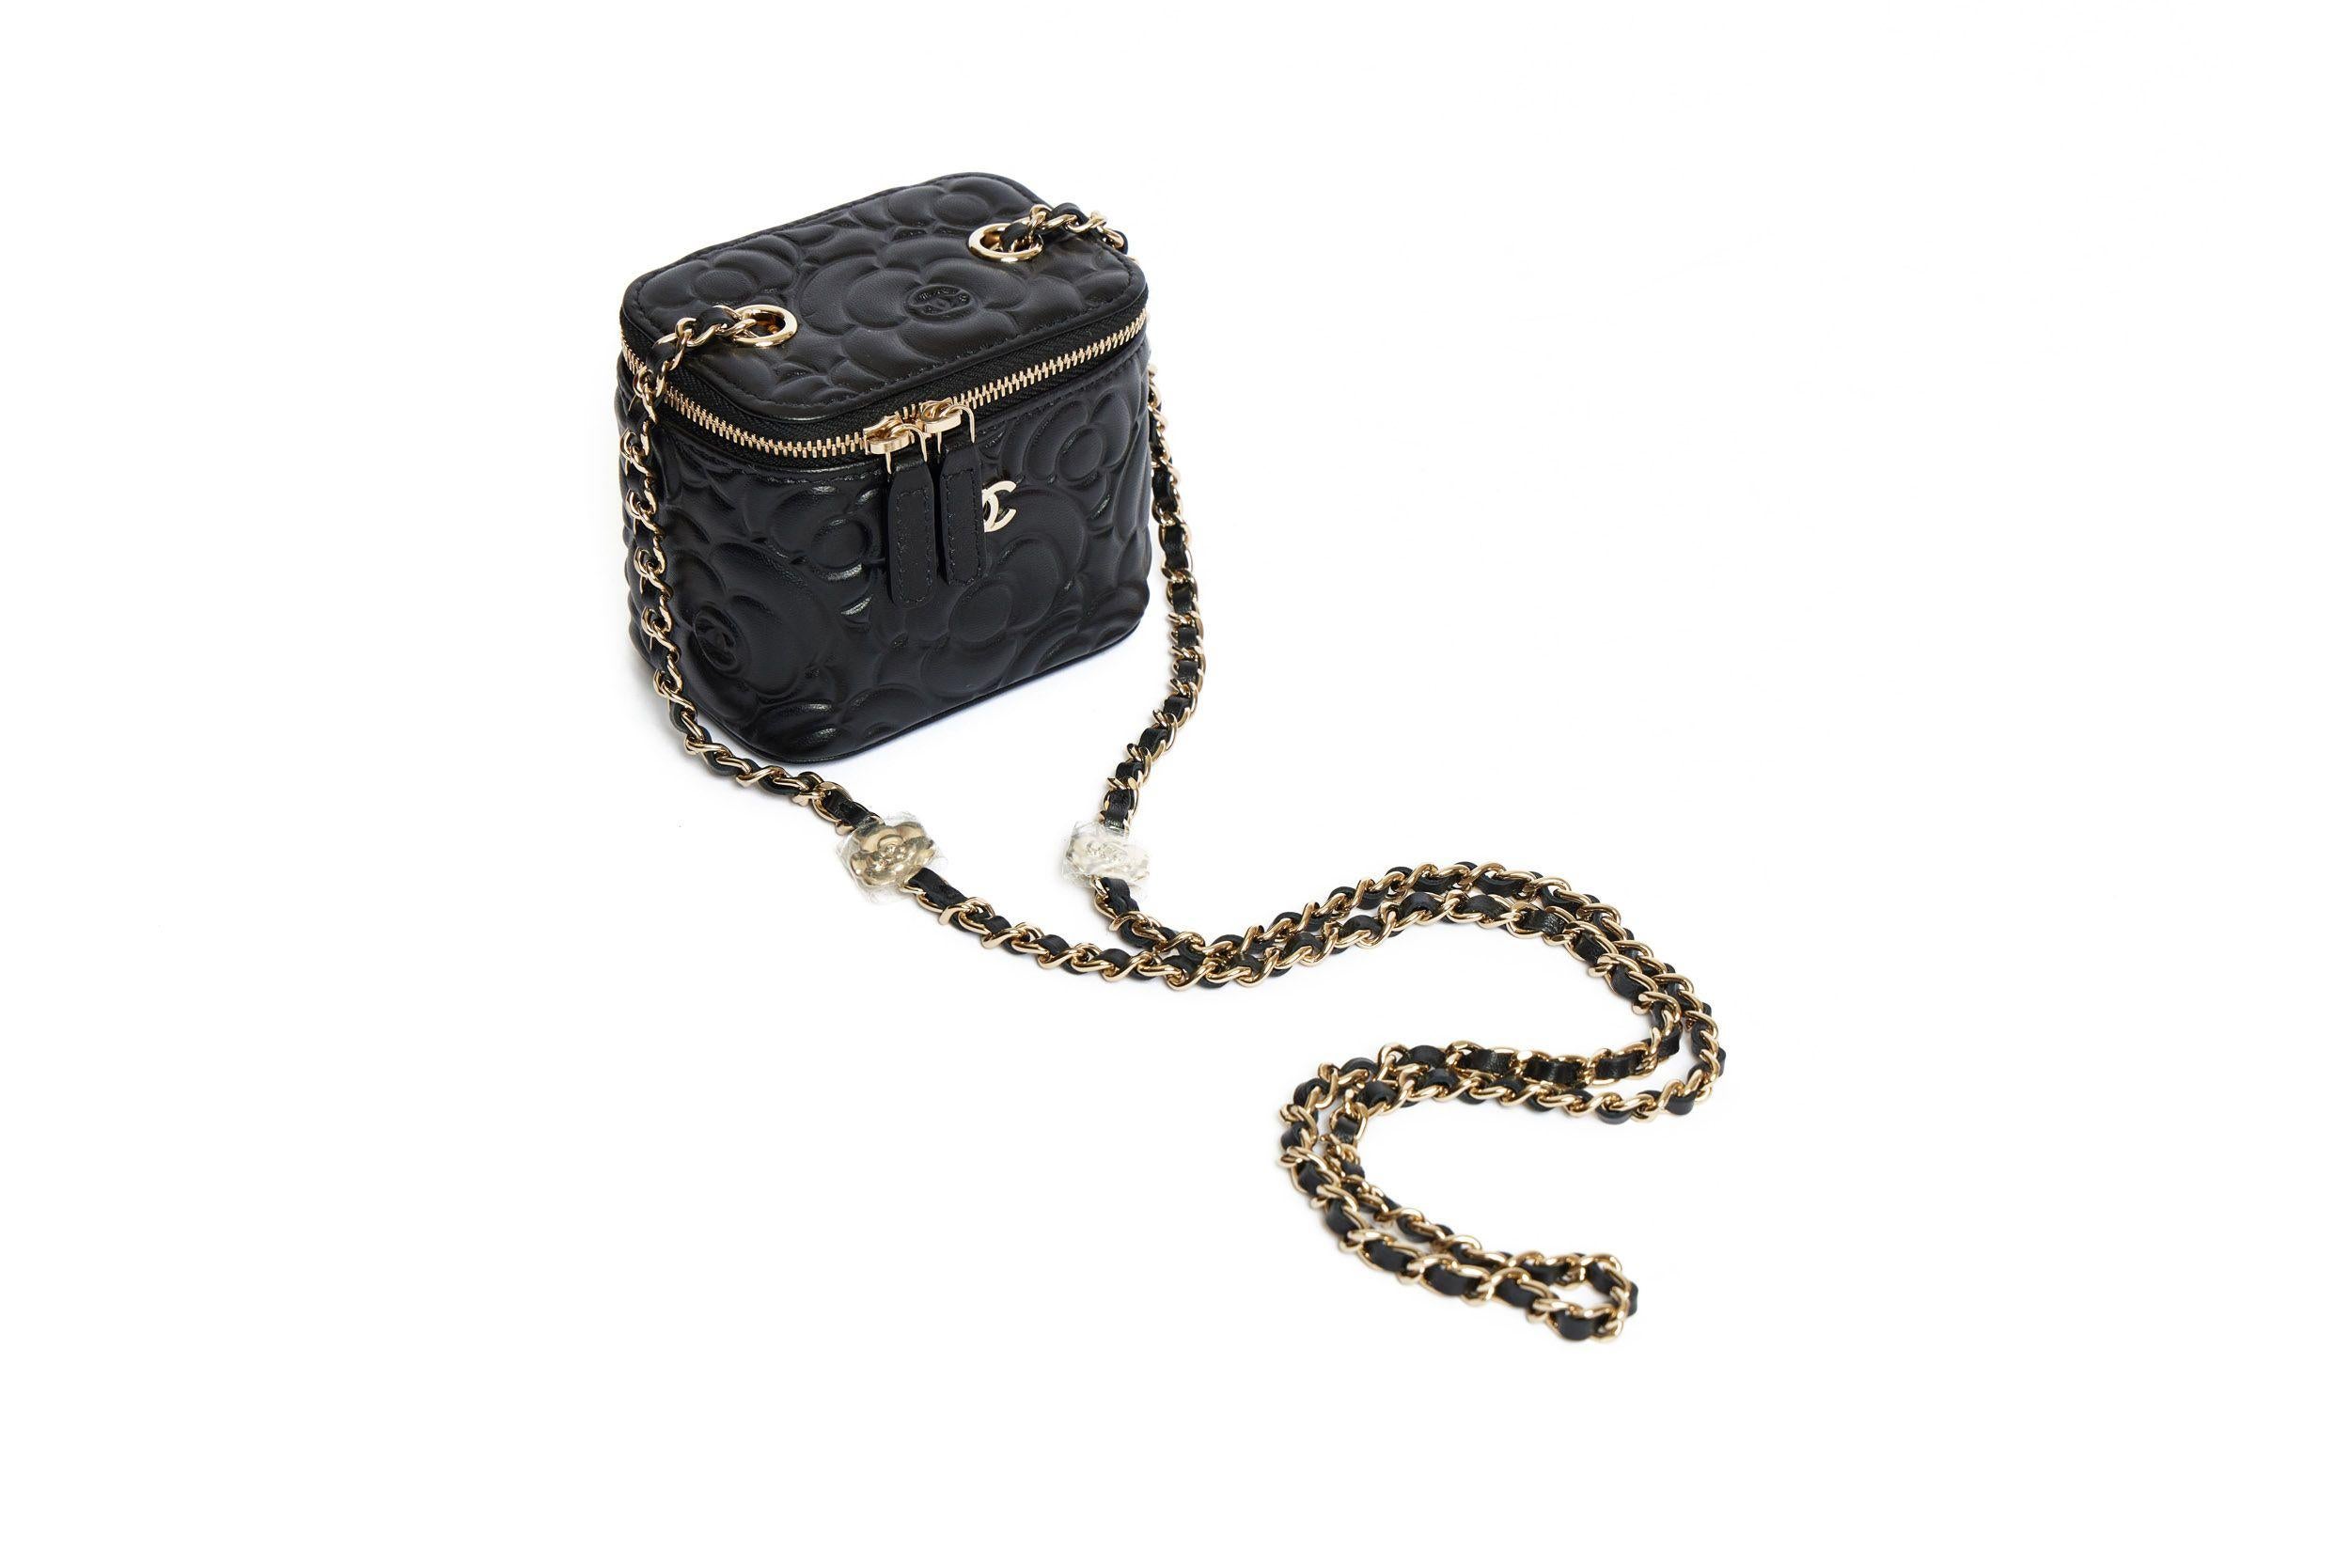 Chanel Mini Vanity Case bag in black with embroidered Camellia pattern. This bag is brand new so that the small flowers on the shoulder leather-threaded gold chain (drop 22’) are still covered in plastic. The bag closes with a zip and in front is